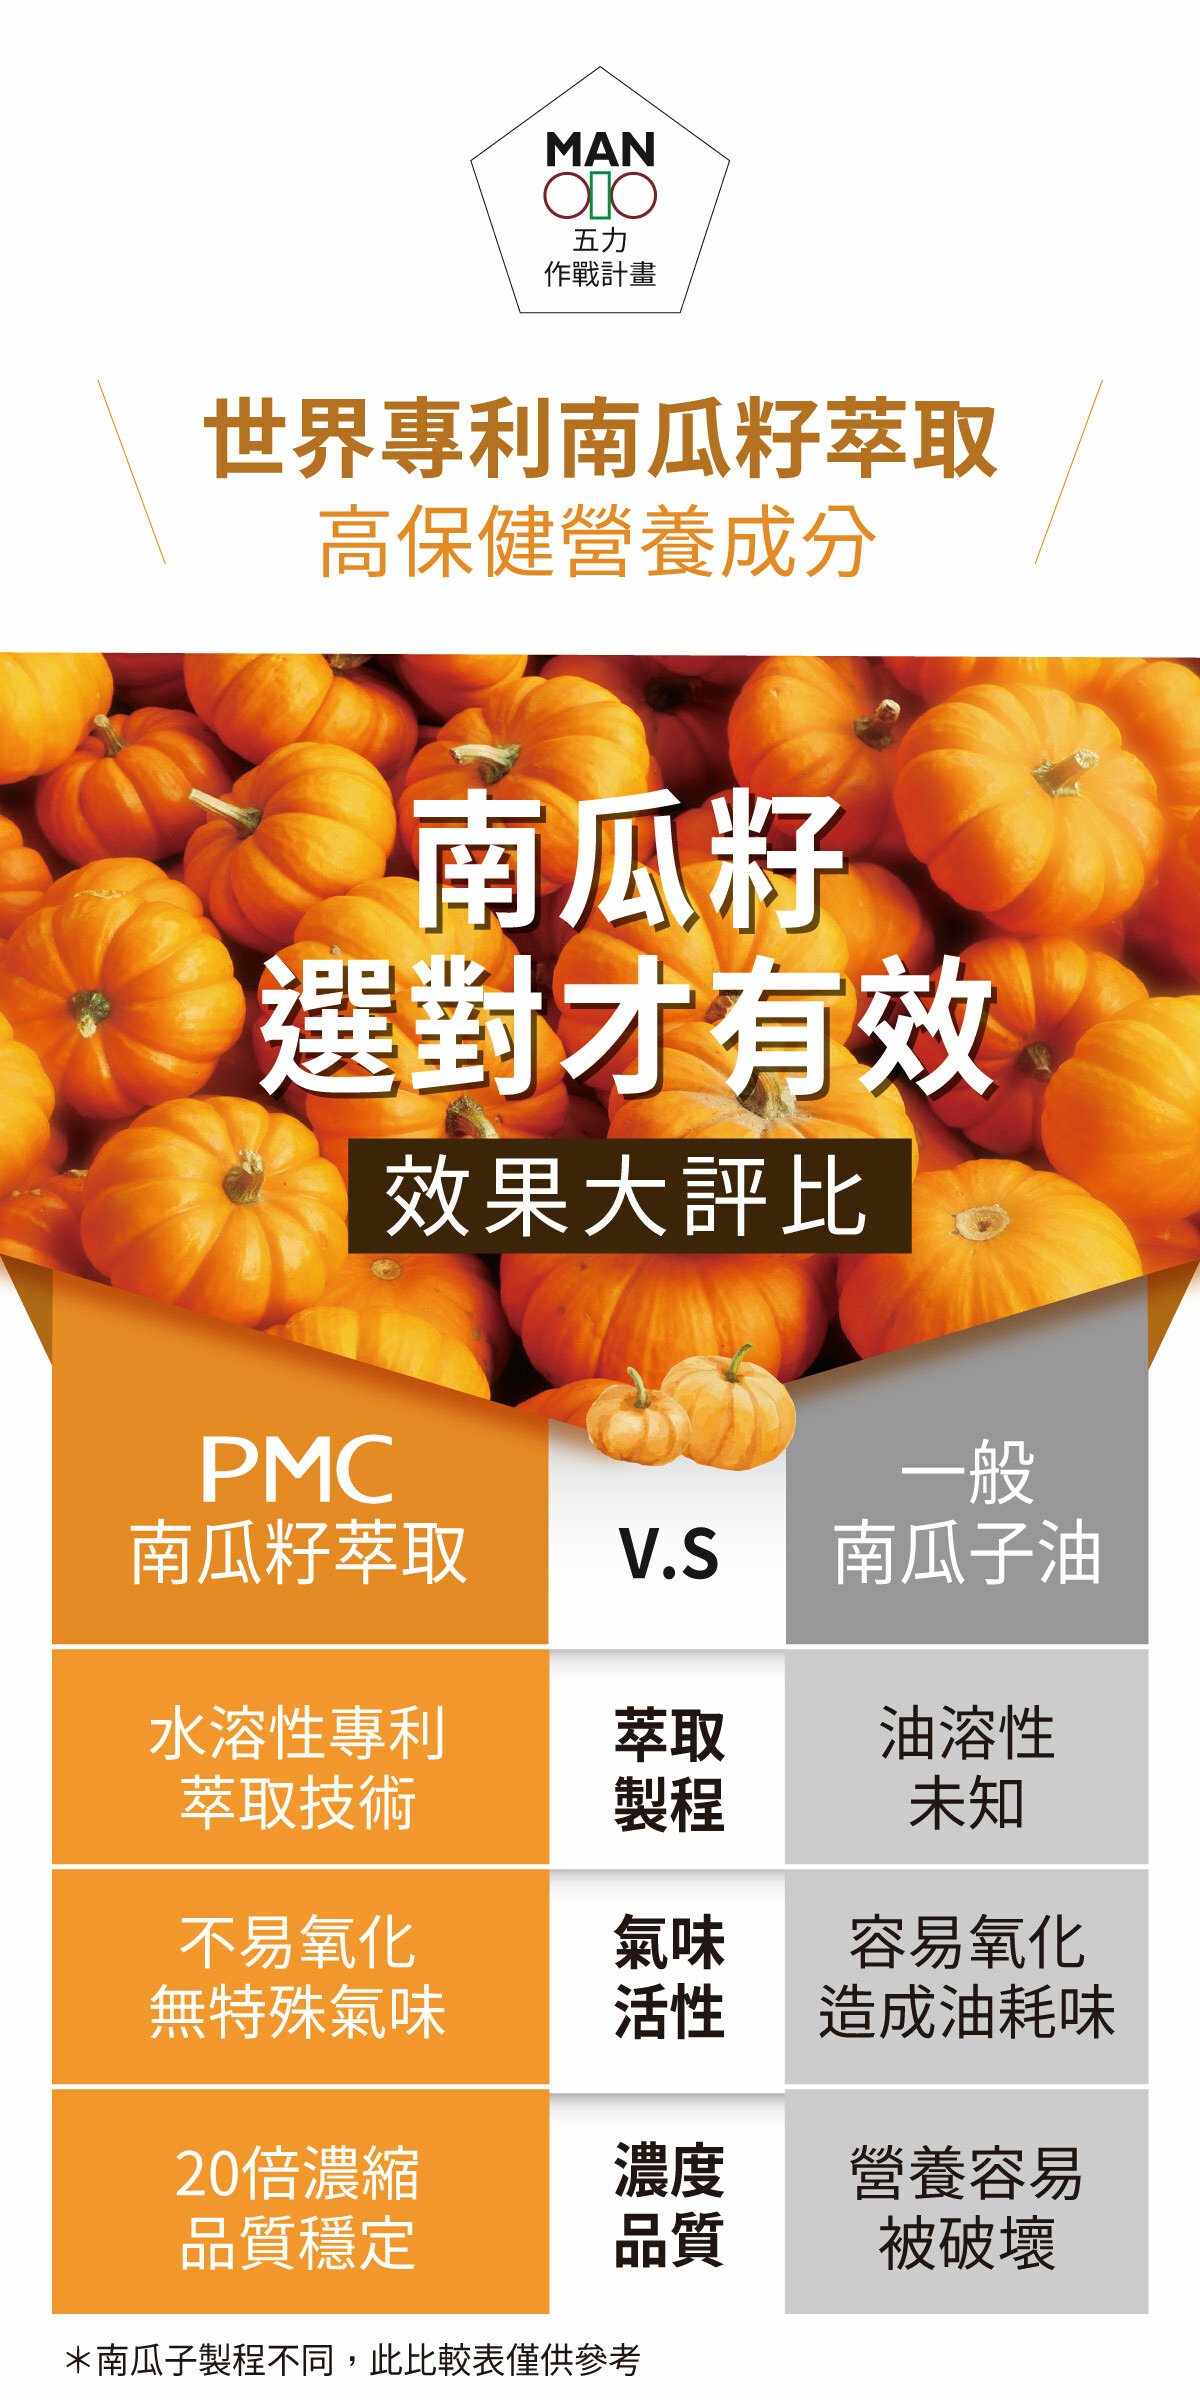 PMC Pumpkin Seed Extracts 20 years of research 32 countries patents